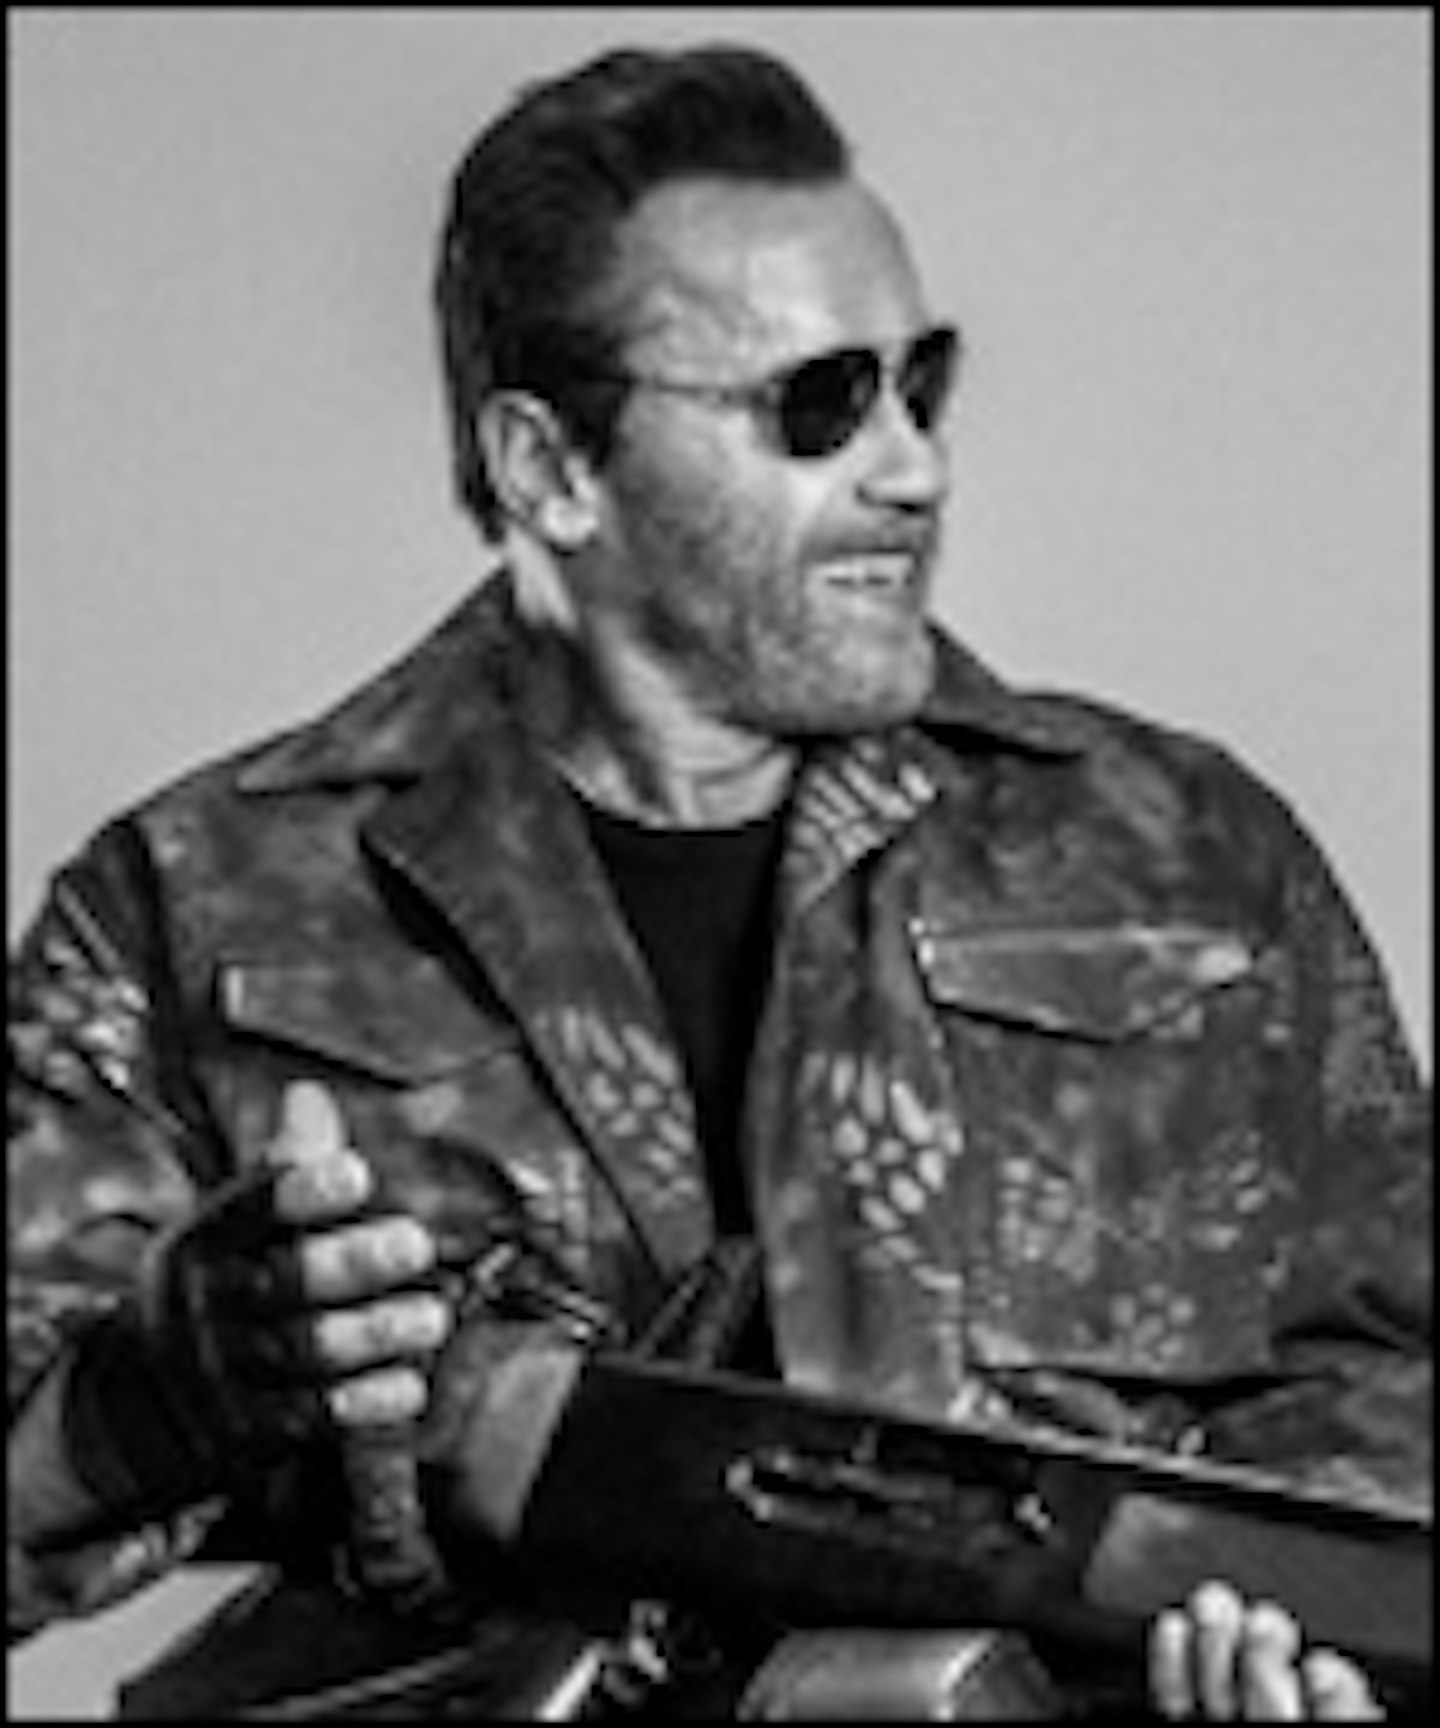 Expendables 3 Character Posters March In